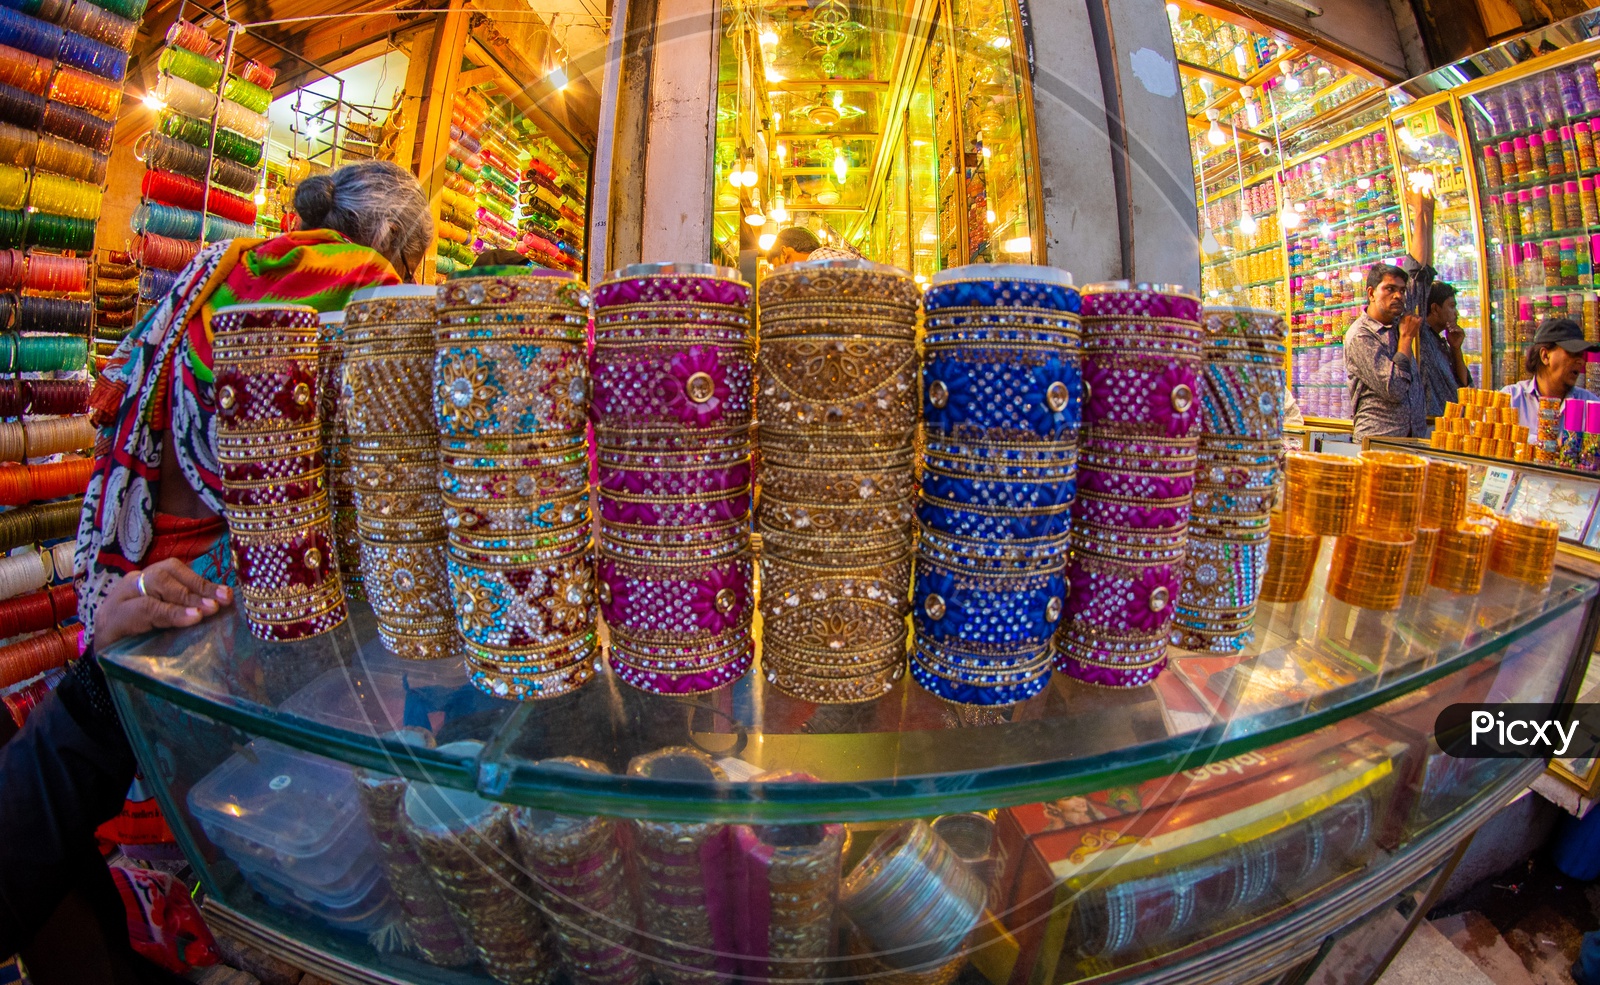 Laq Bangles or Bangles made of Laquer